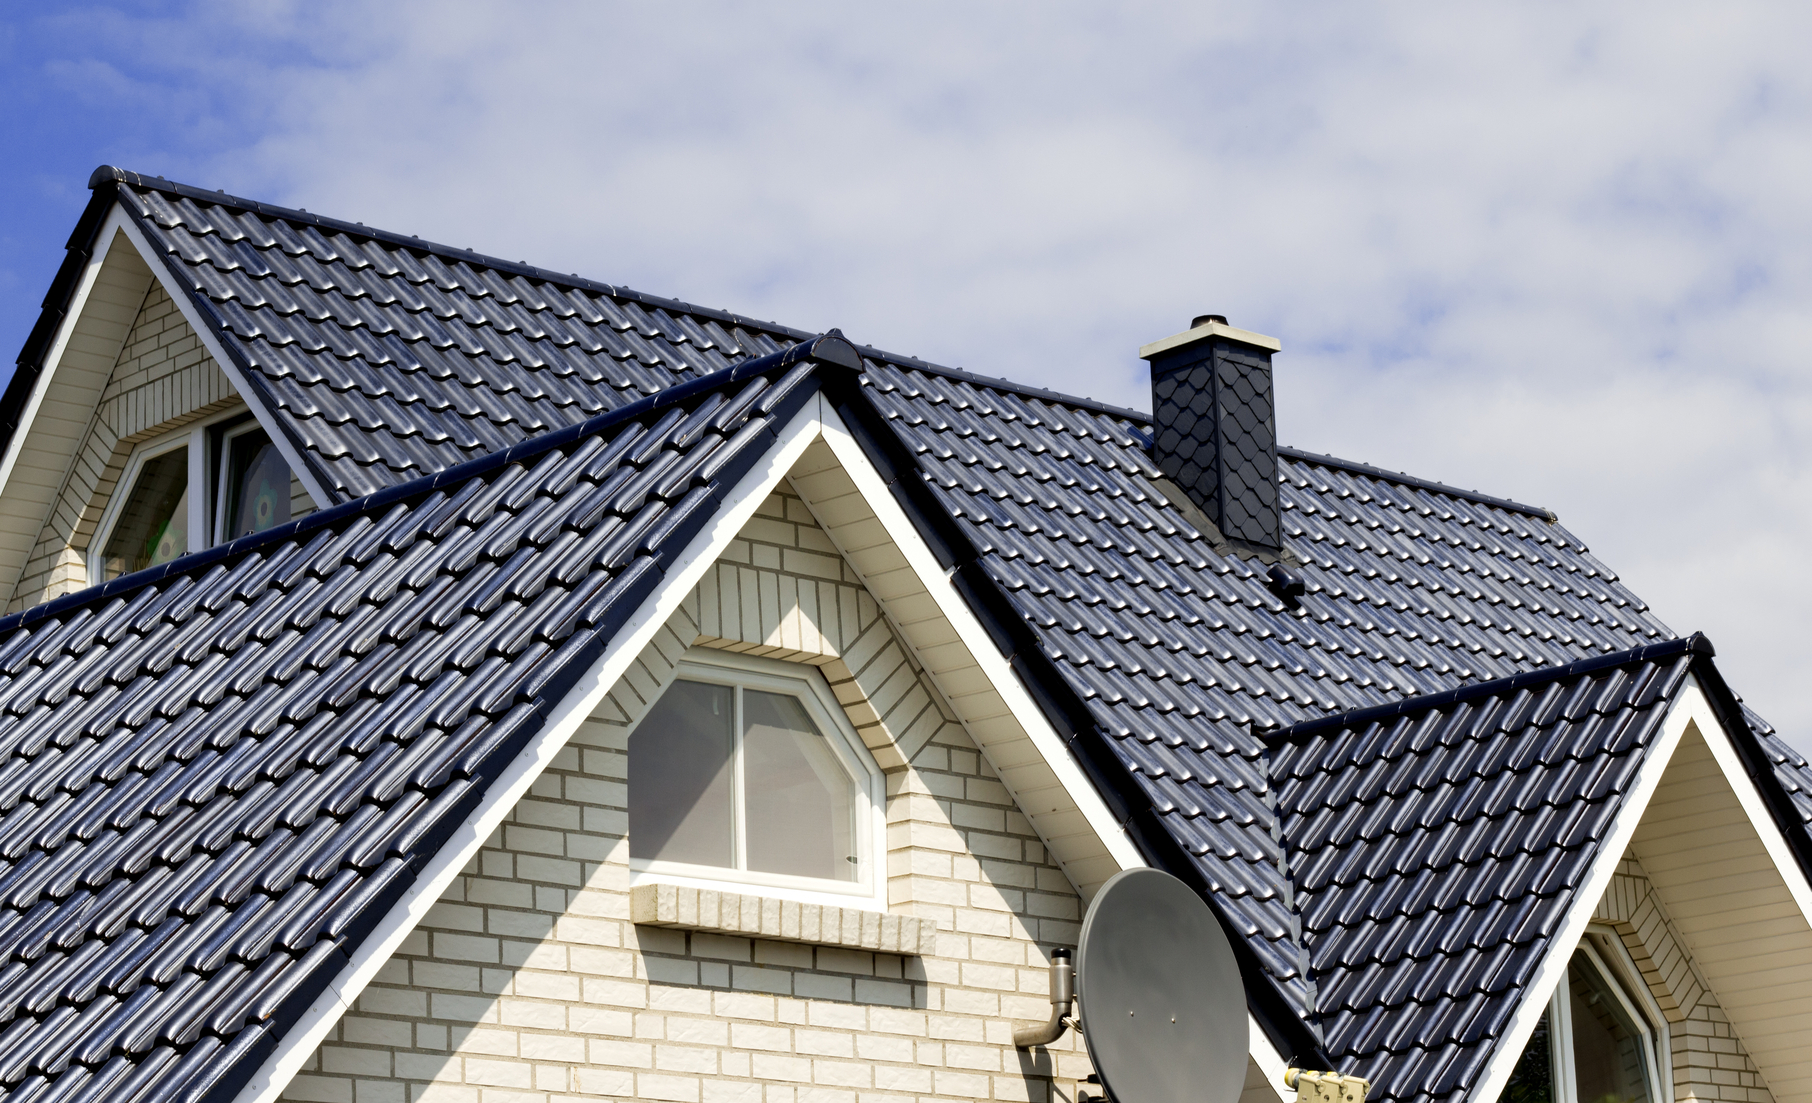 Great Tips For Keeping Any Roofing In Desirable Condition